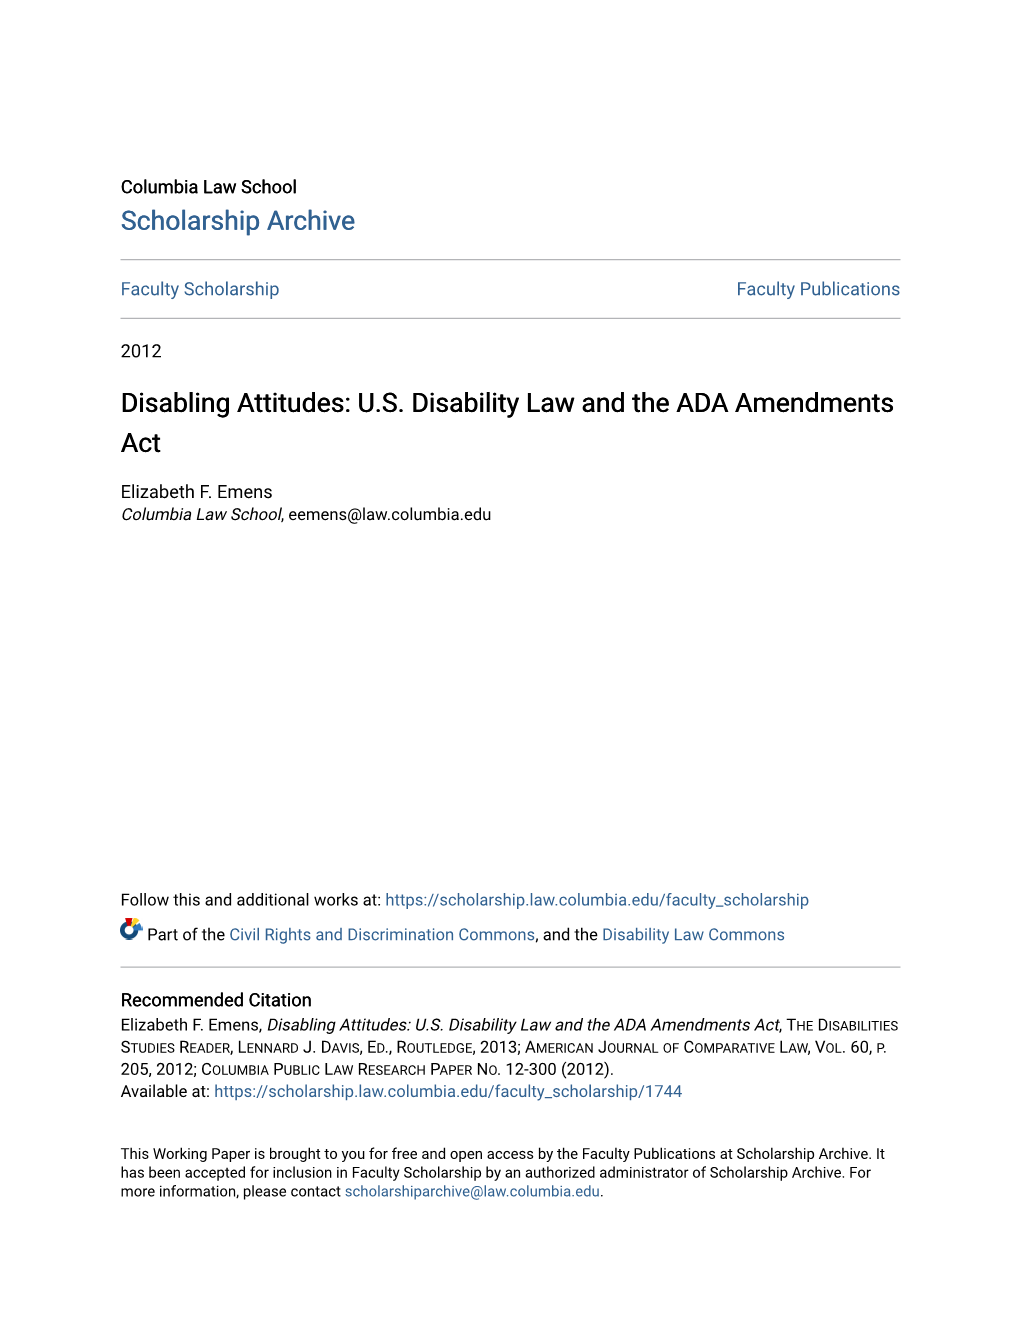 US Disability Law and the ADA Amendments